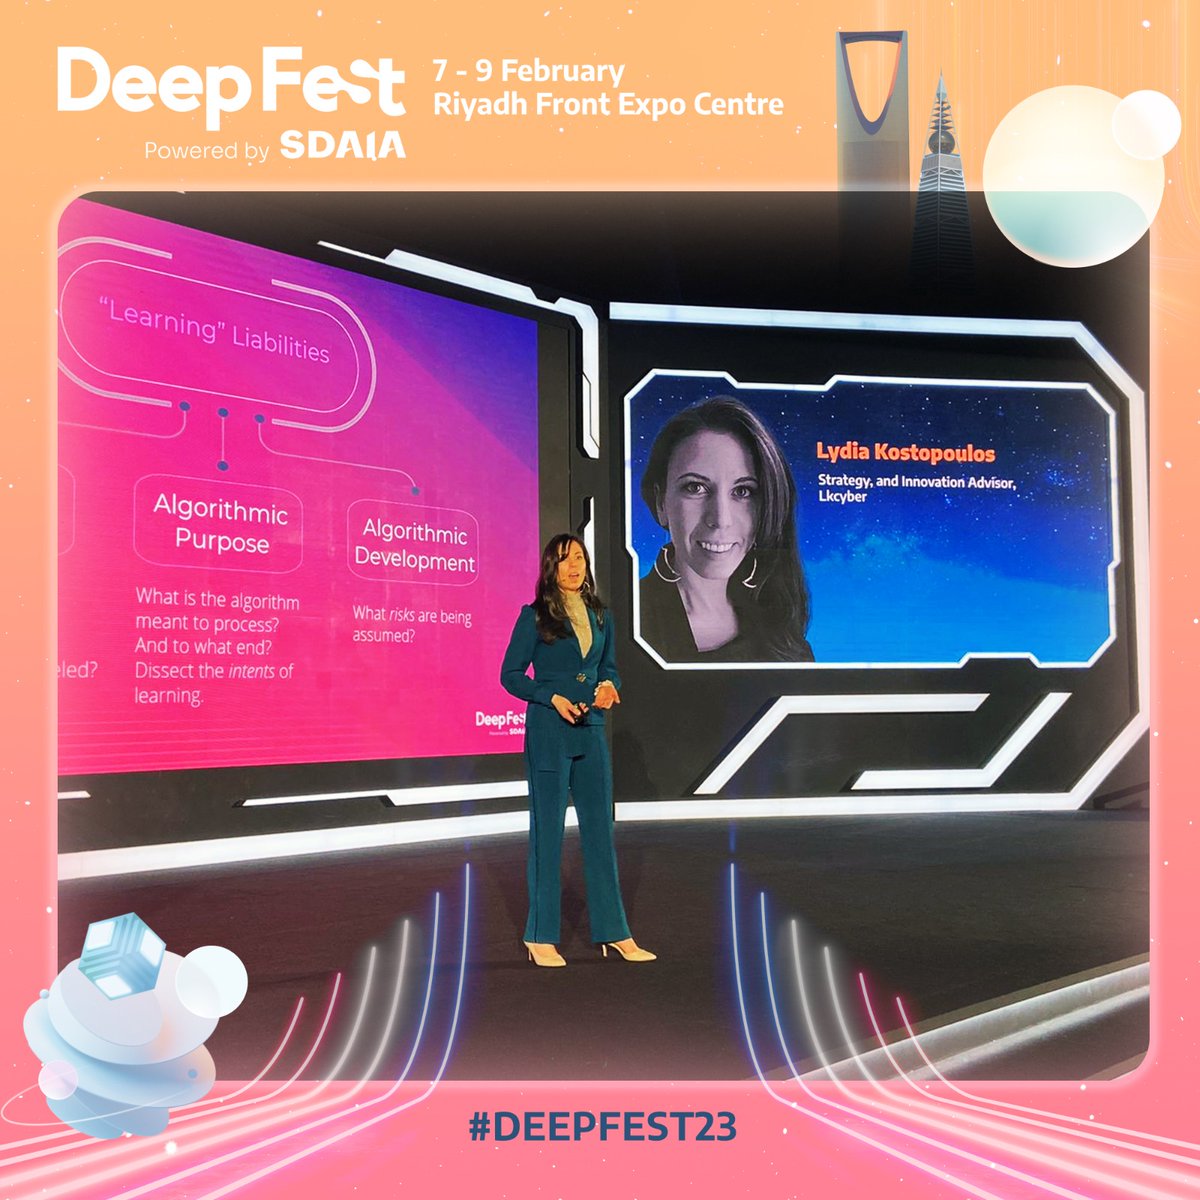 Dr. Lydia Kostopoulos (Strategy and Innovation Advisor, Lkcyber) is now talking about: 'Decoupling human characteristics from algorithmic capabilities'. 

Check out more of DeepFest here: loom.ly/jItaGIY 
@SDAIA_SA @deepfestai

#PoweredBySDAIA #DeepFest23 #LEAP23